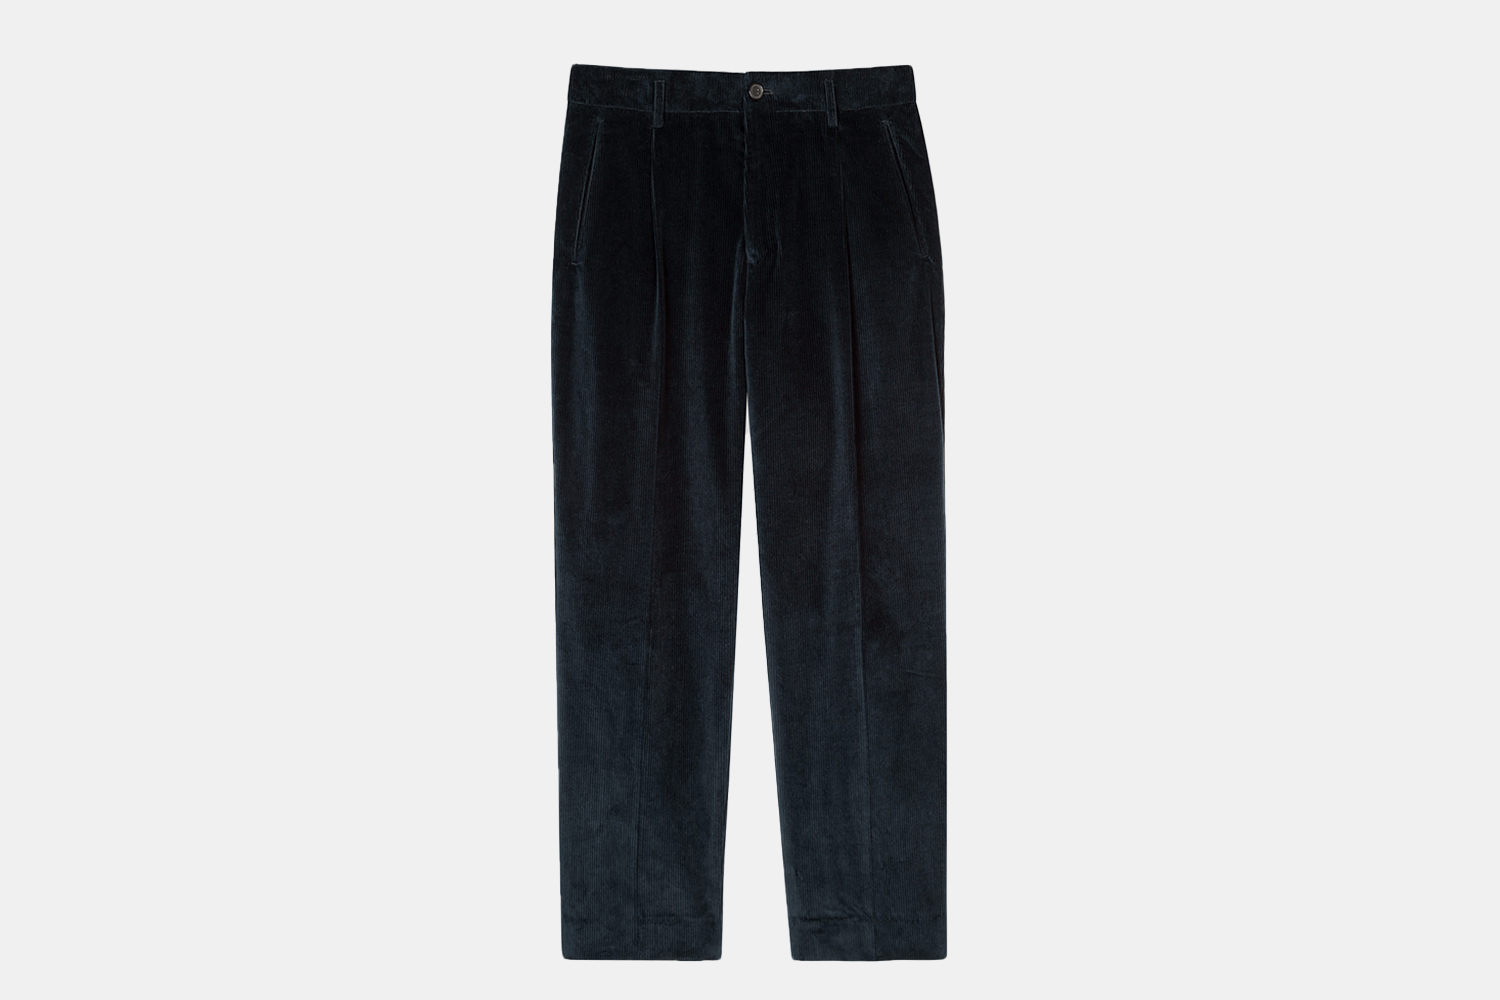 a pair of deep navy corduroy trousers.